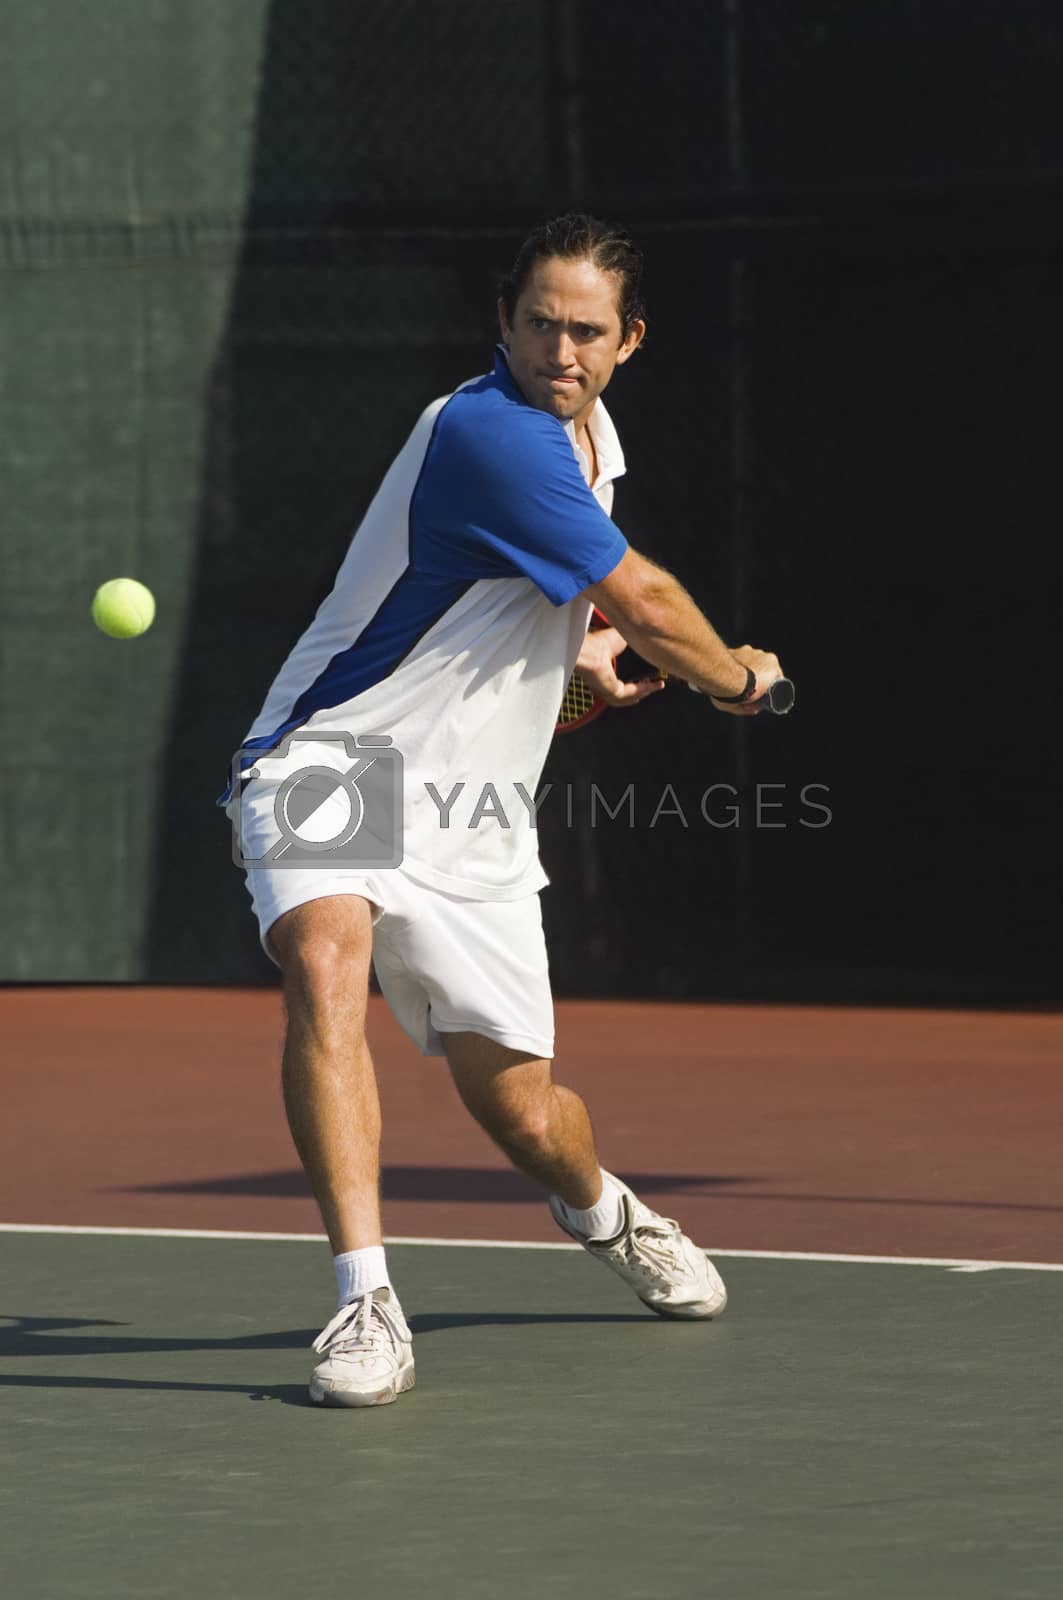 Royalty free image of Full length of male tennis player about to hit a ball by moodboard